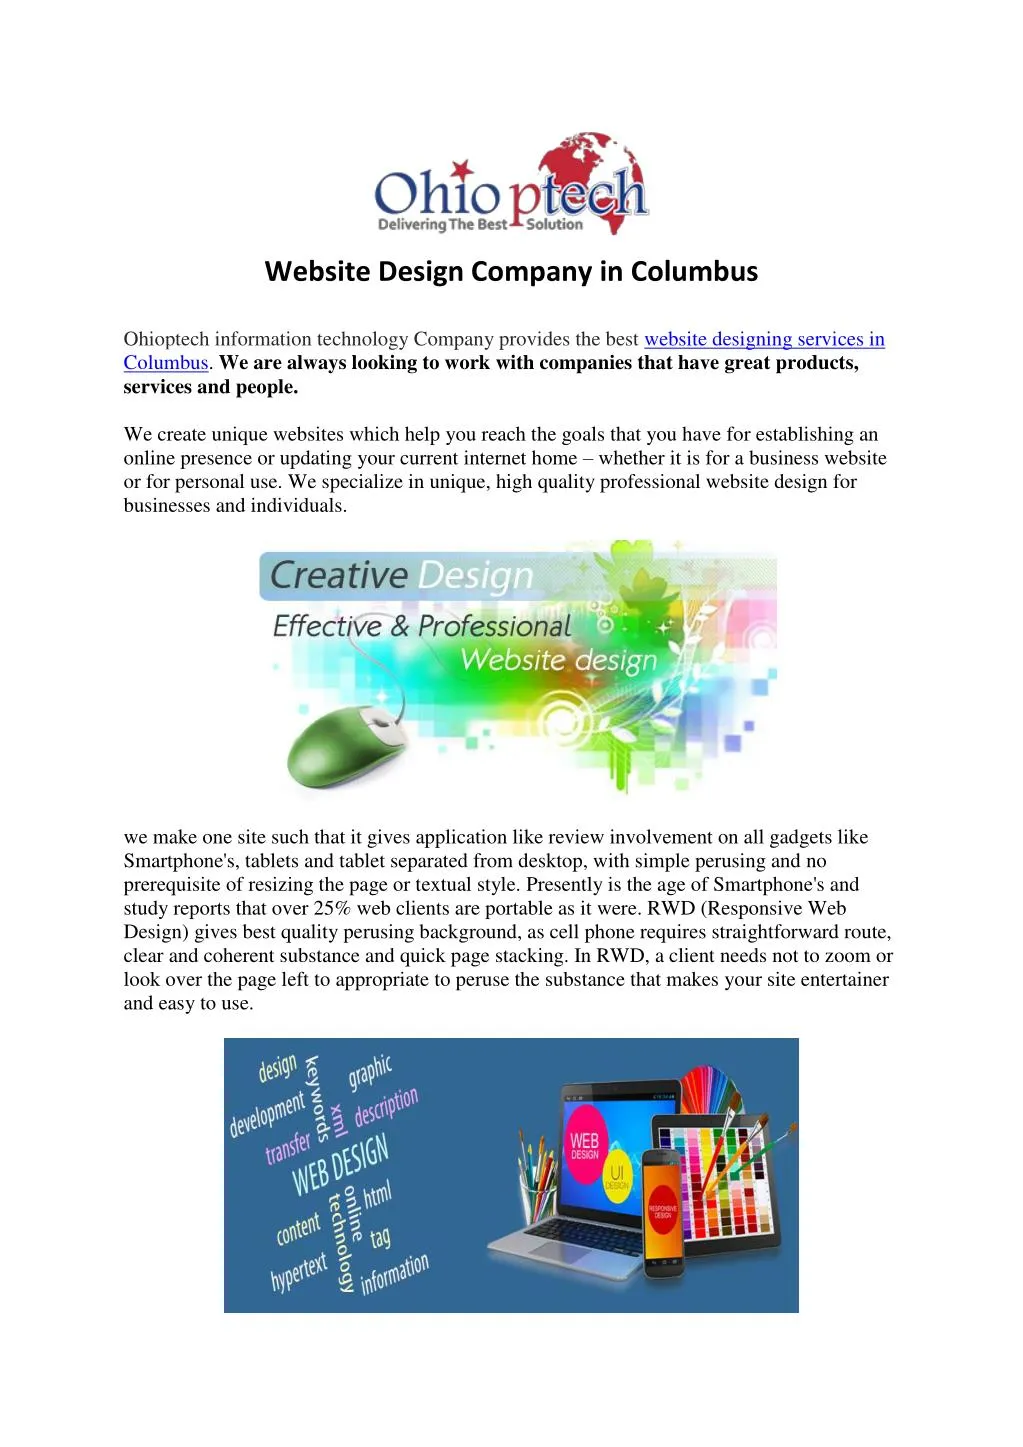 website design company in columbus ohioptech